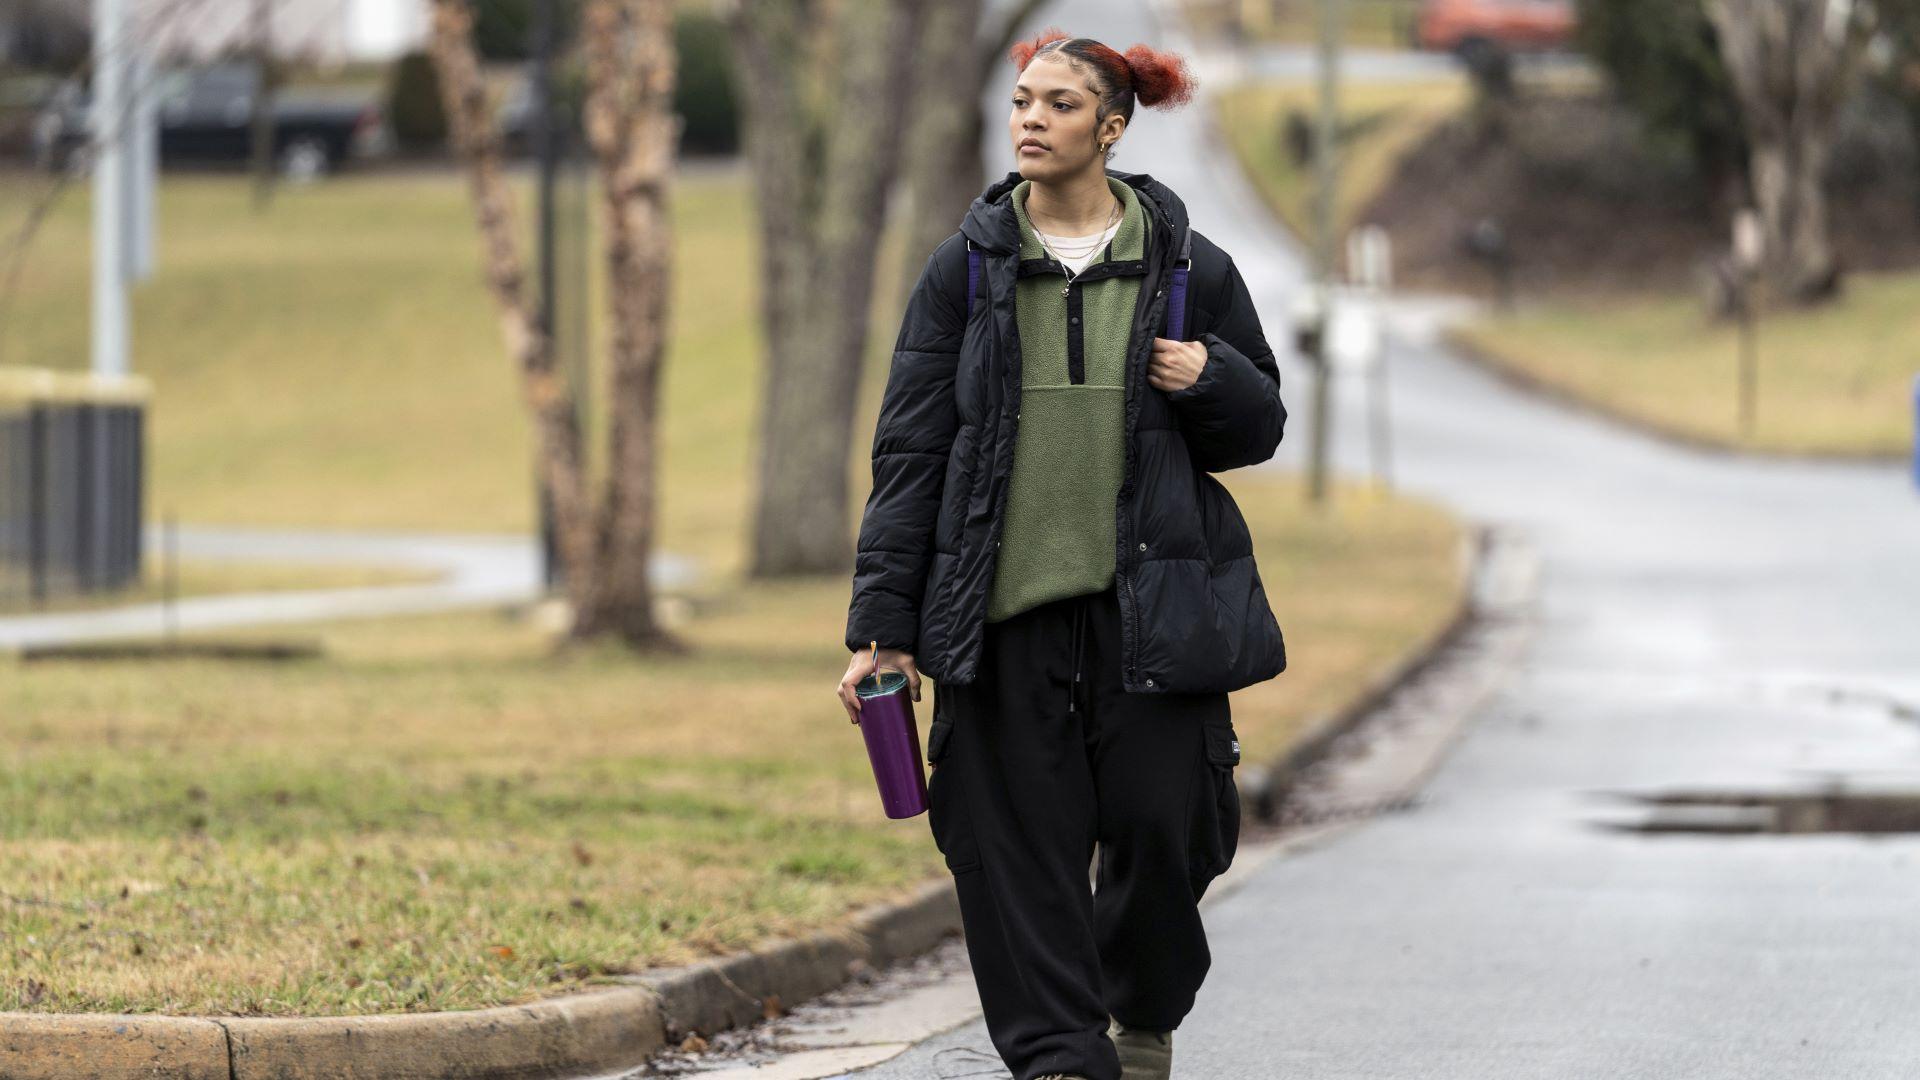 Kailani Taylor-Cribb walks through her neighborhood in Asheville, N.C., on Tuesday, Jan. 31, 2023. Kailani hasn’t taken a single class in what used to be her high school since the height of the coronavirus pandemic. She vanished from the public school roll in Cambridge, Mass., in 2021 and has been, from an administrative standpoint, unaccounted for since then. (AP Photo/Kathy Kmonicek)